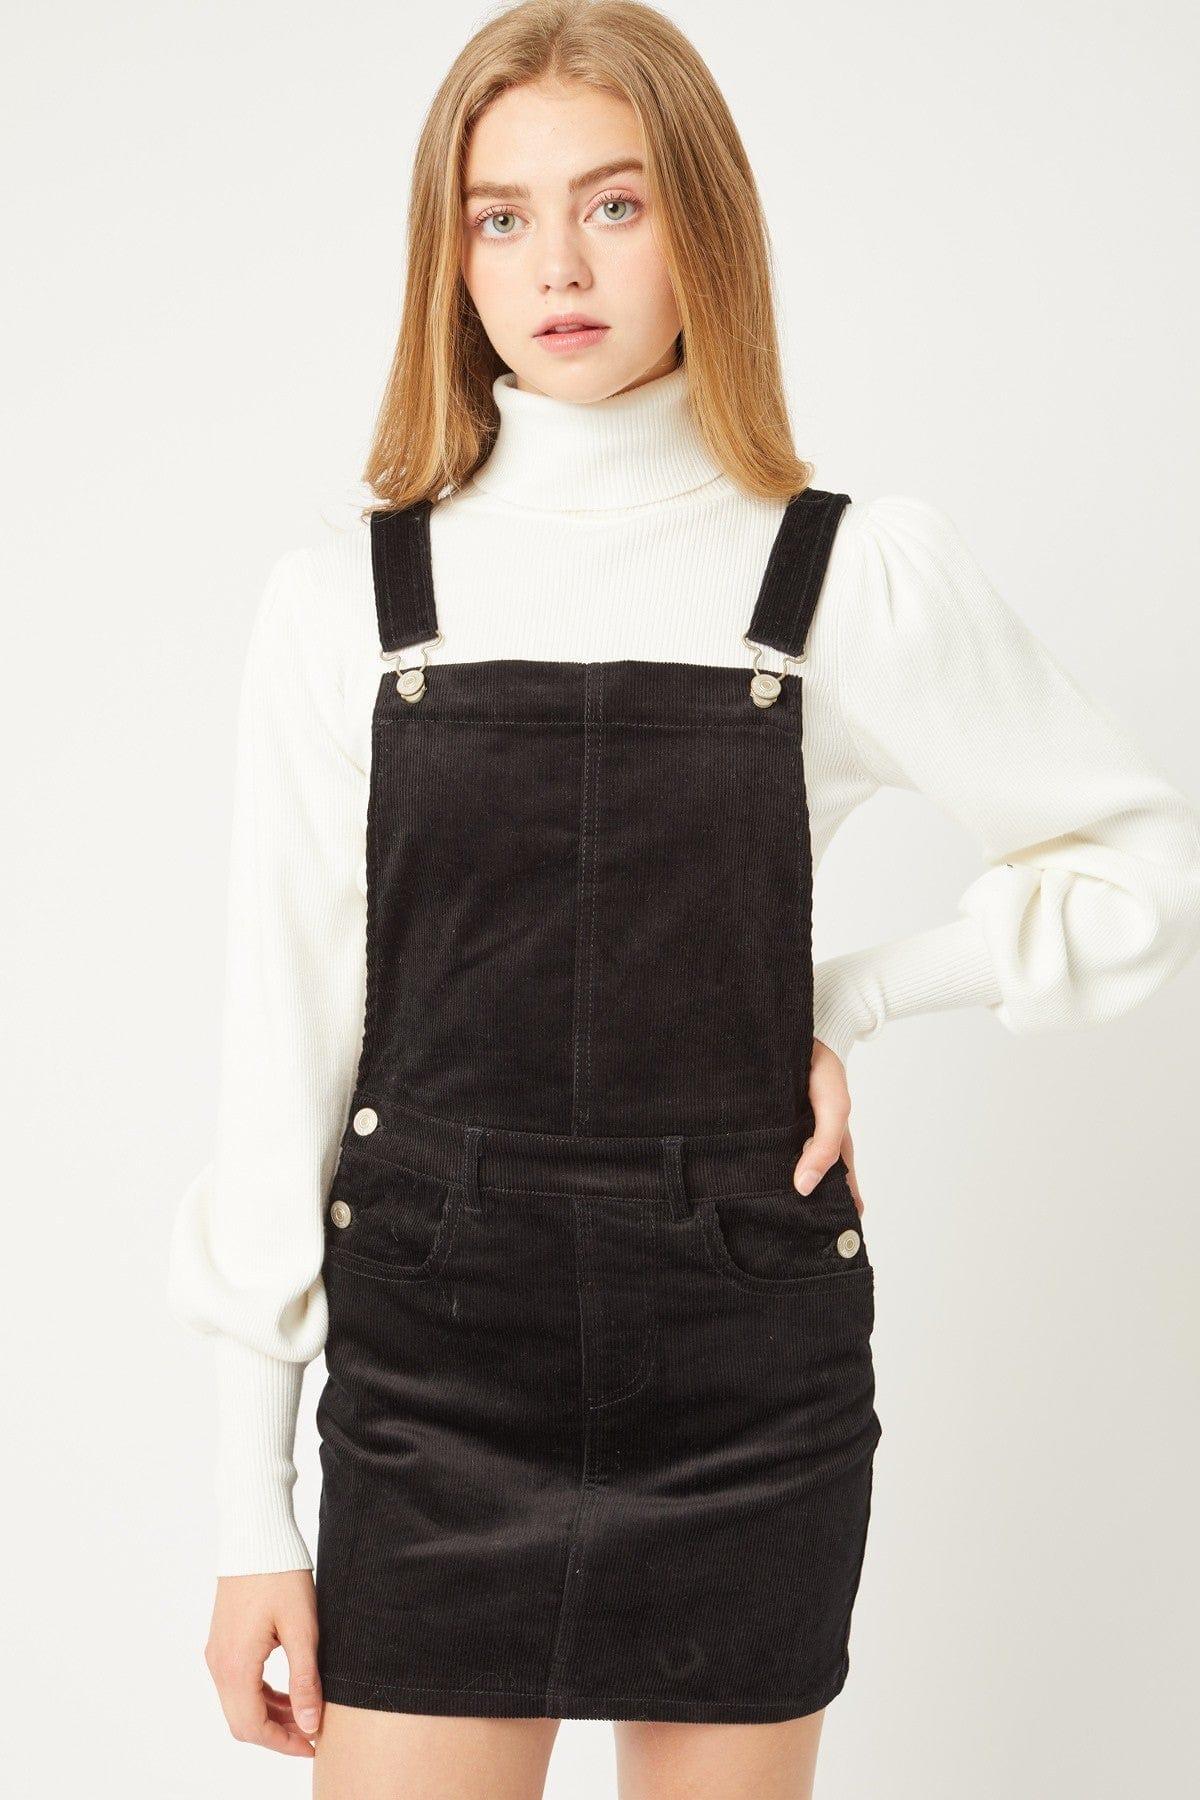 SAVLUXE Overall Dress W/ Adjustable Straps, Belt Loops, And Two Front And Back Pockets